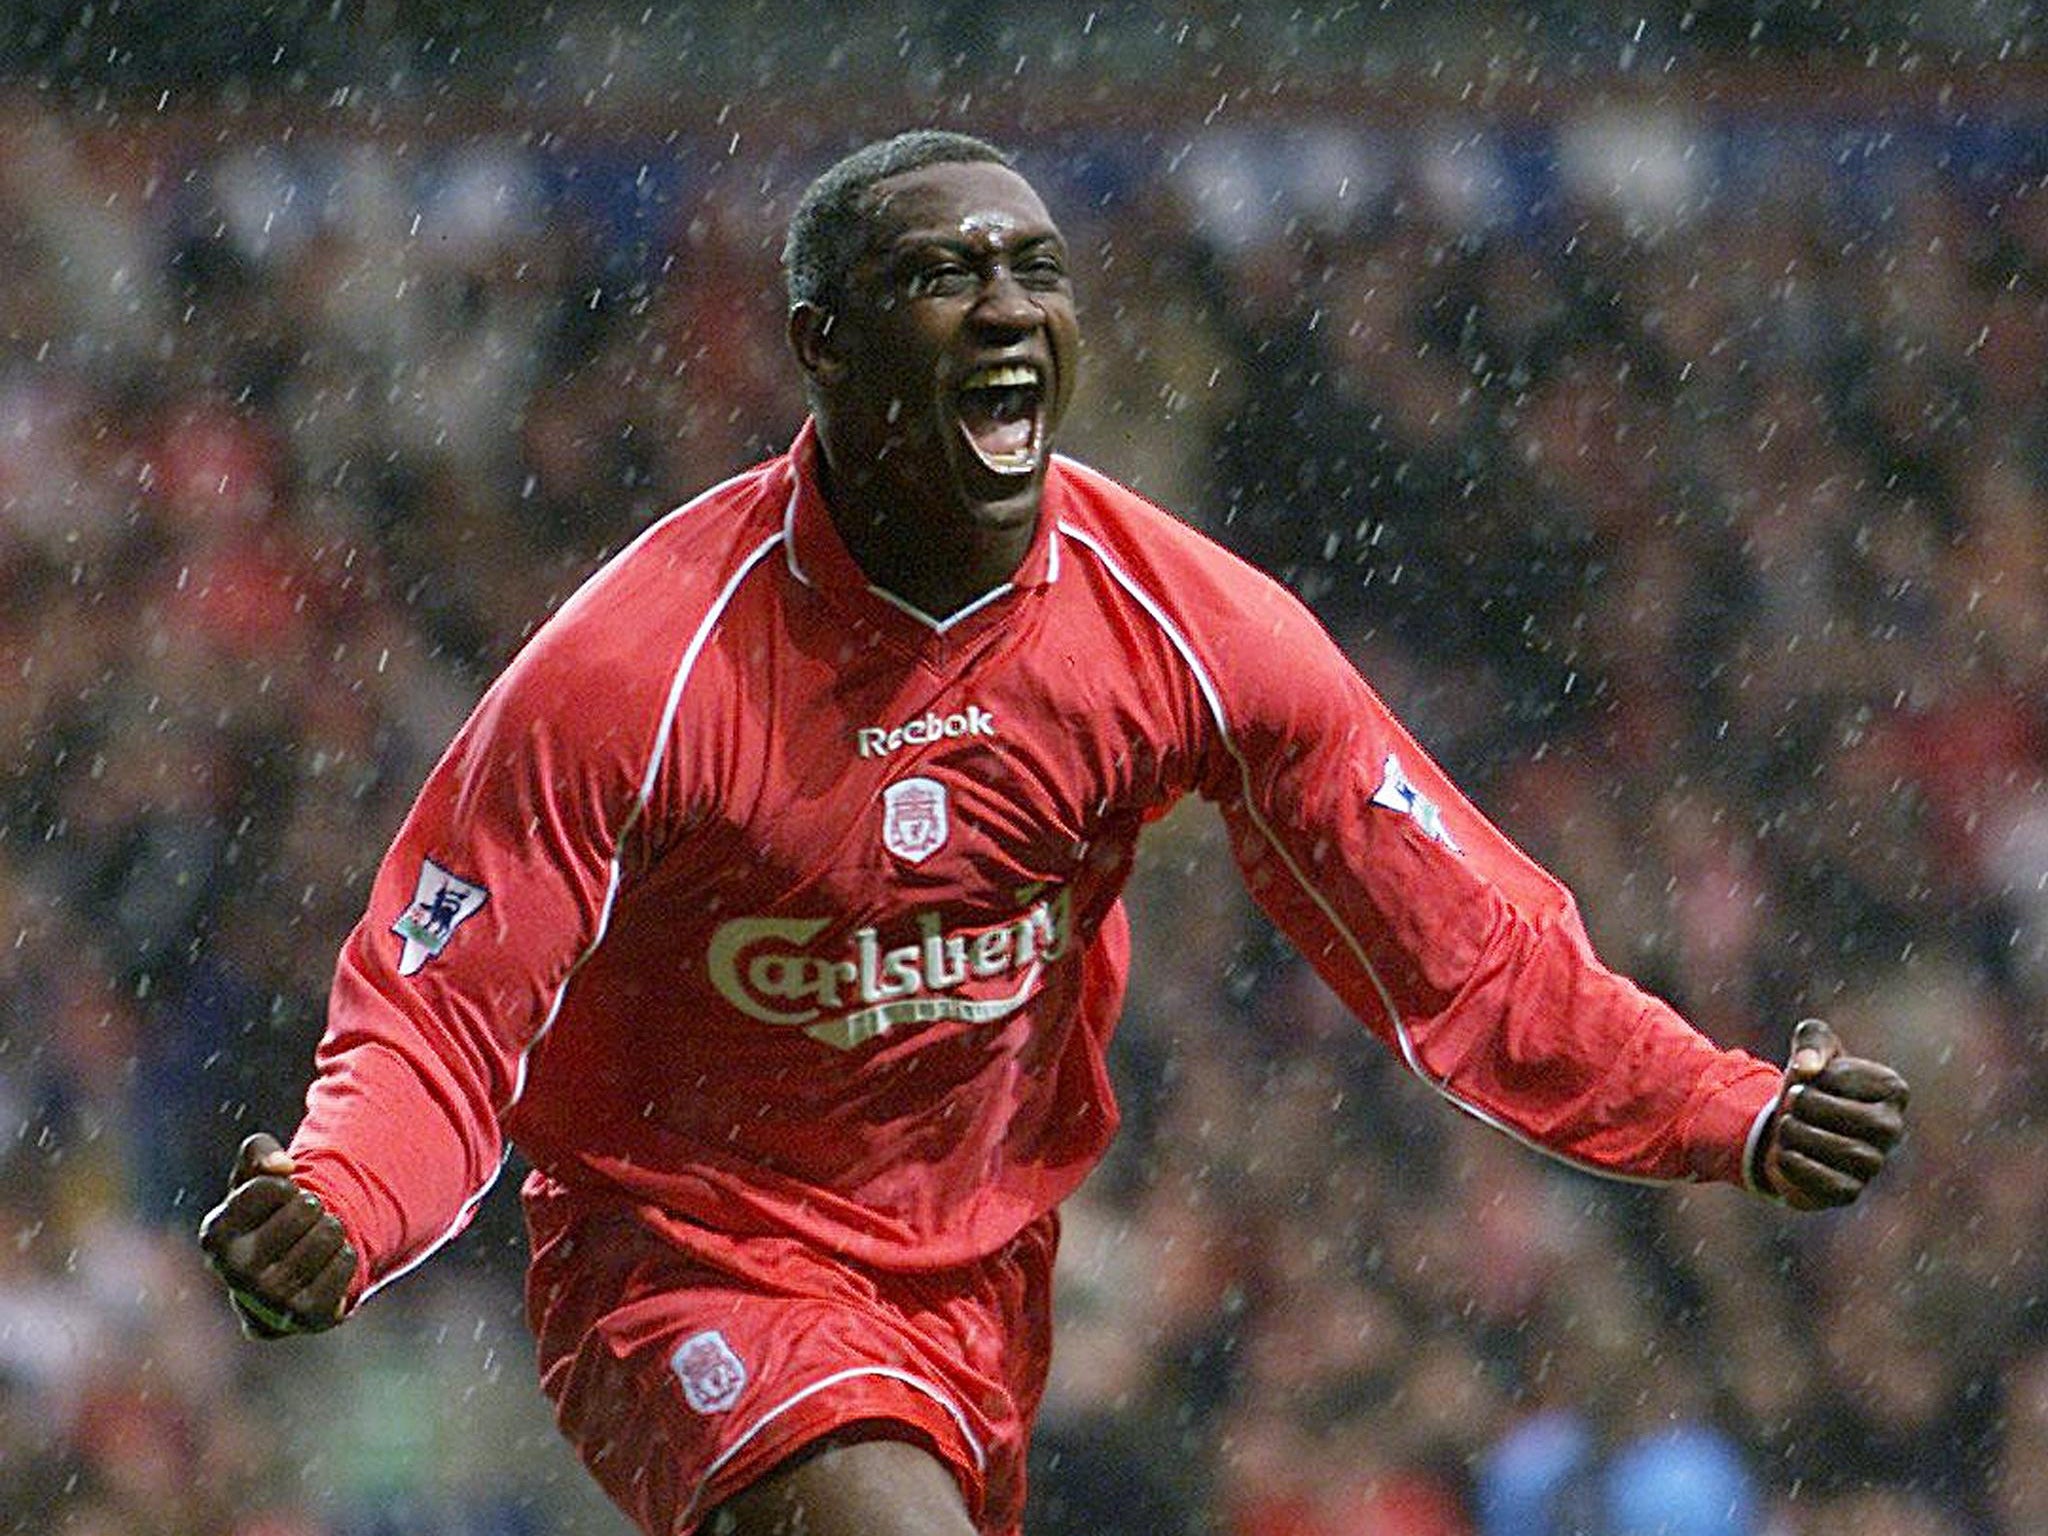 Heskey joined Liverpool in 2000 for a then club-record fee